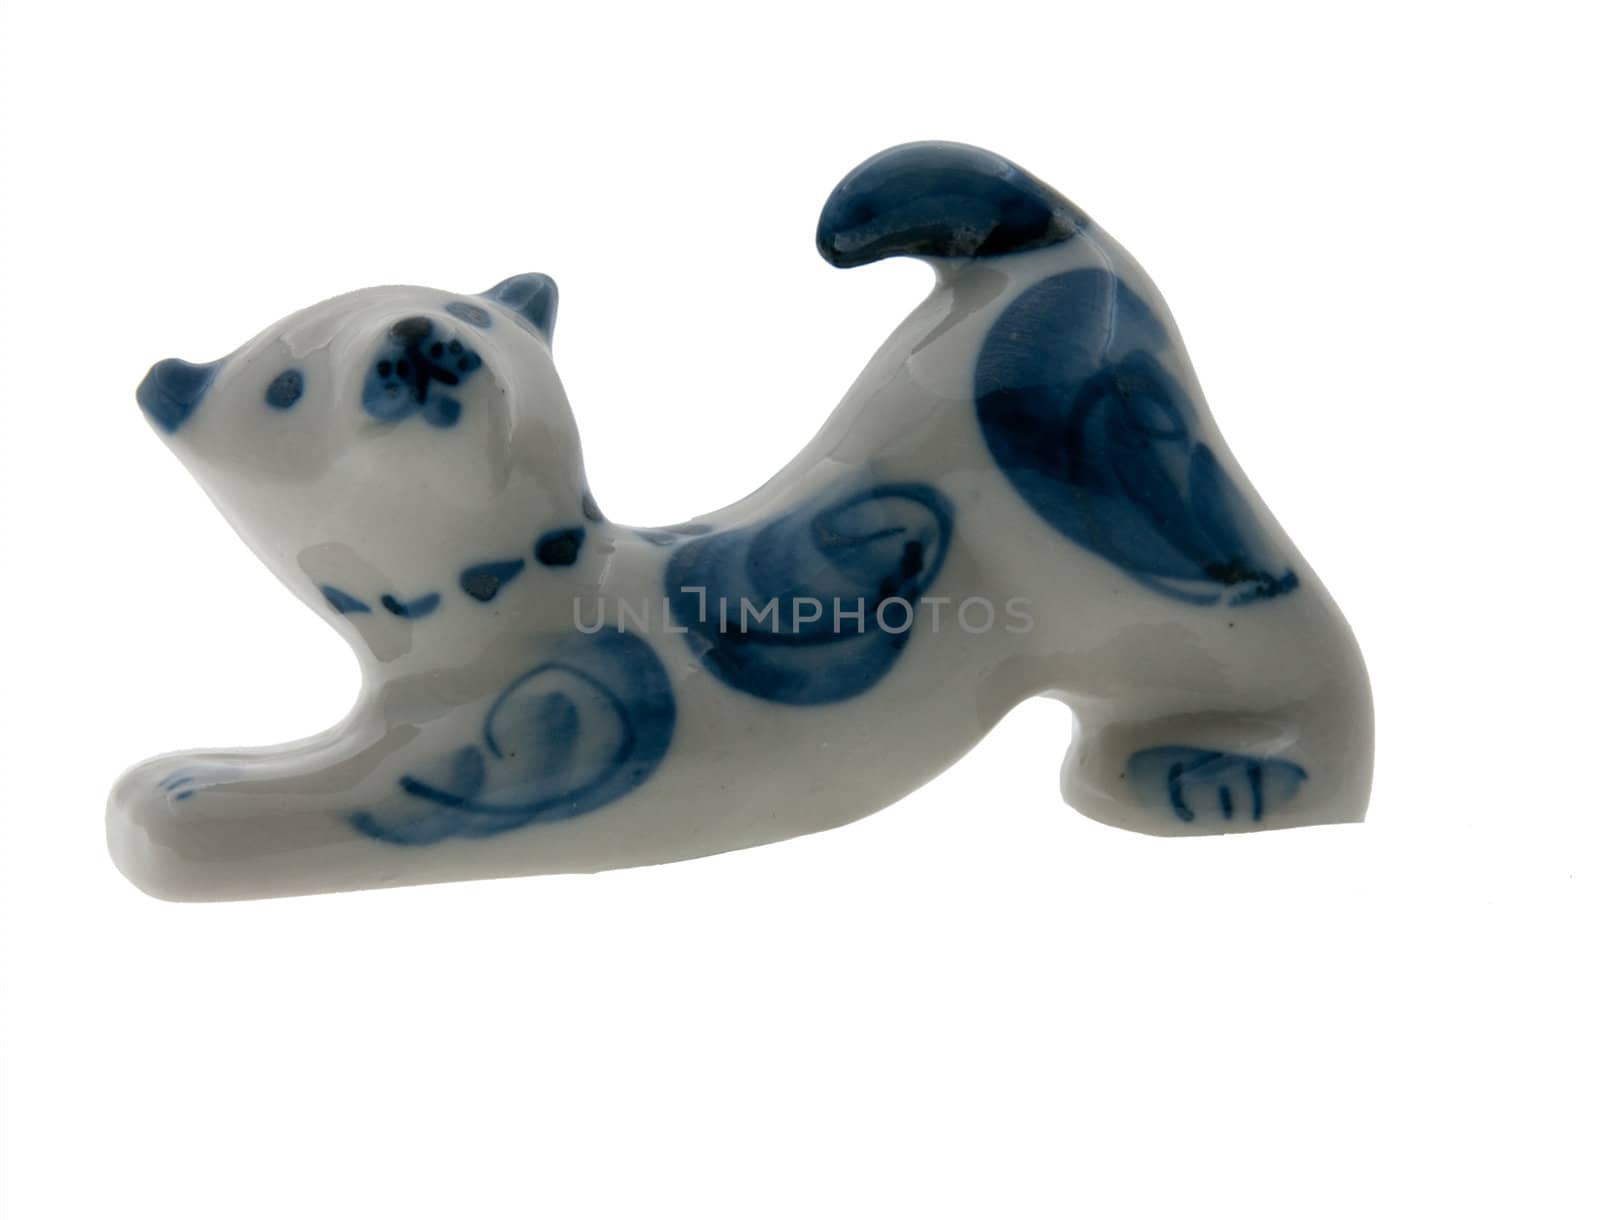 Gzhel (a brand of Russian ceramics, painted with blue on white)